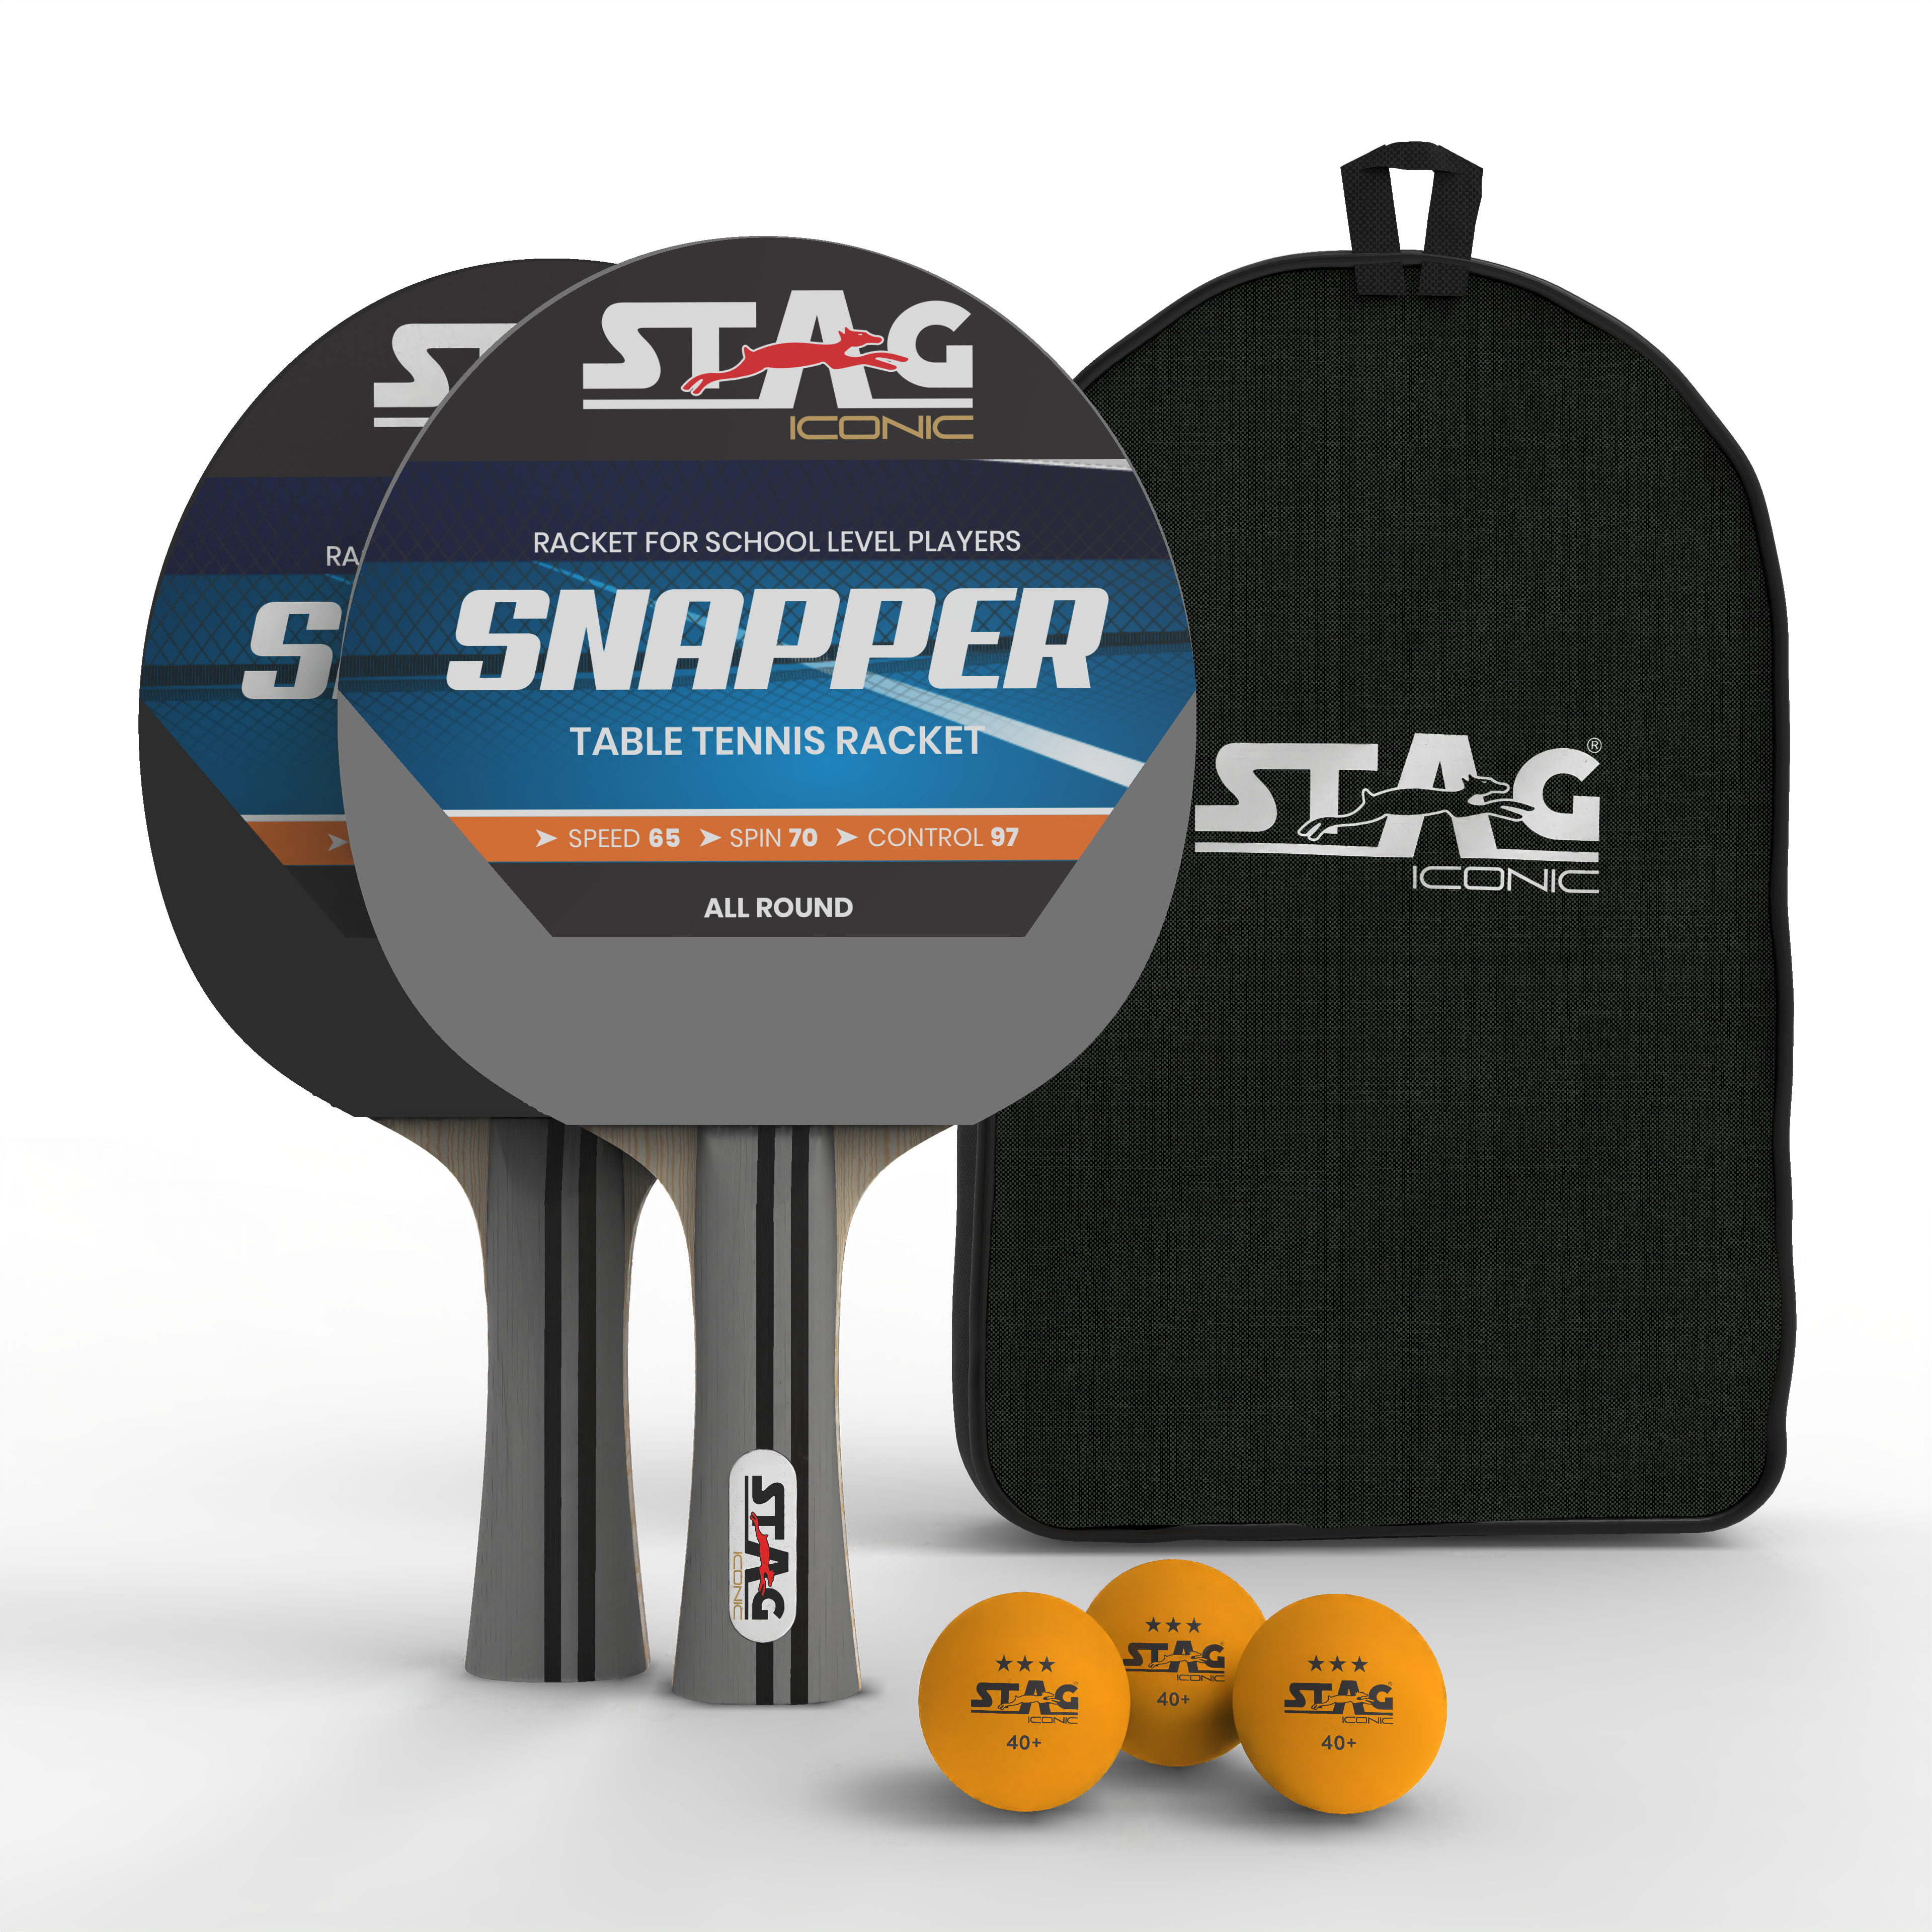 Stag Iconic Spring Collection Snapper Series Table Tennis | Unleash Game with Vibrant, Playful Ping-Pop Colors| Beginner Training Series| Perfectly Designed Comfortable Grip Paddle